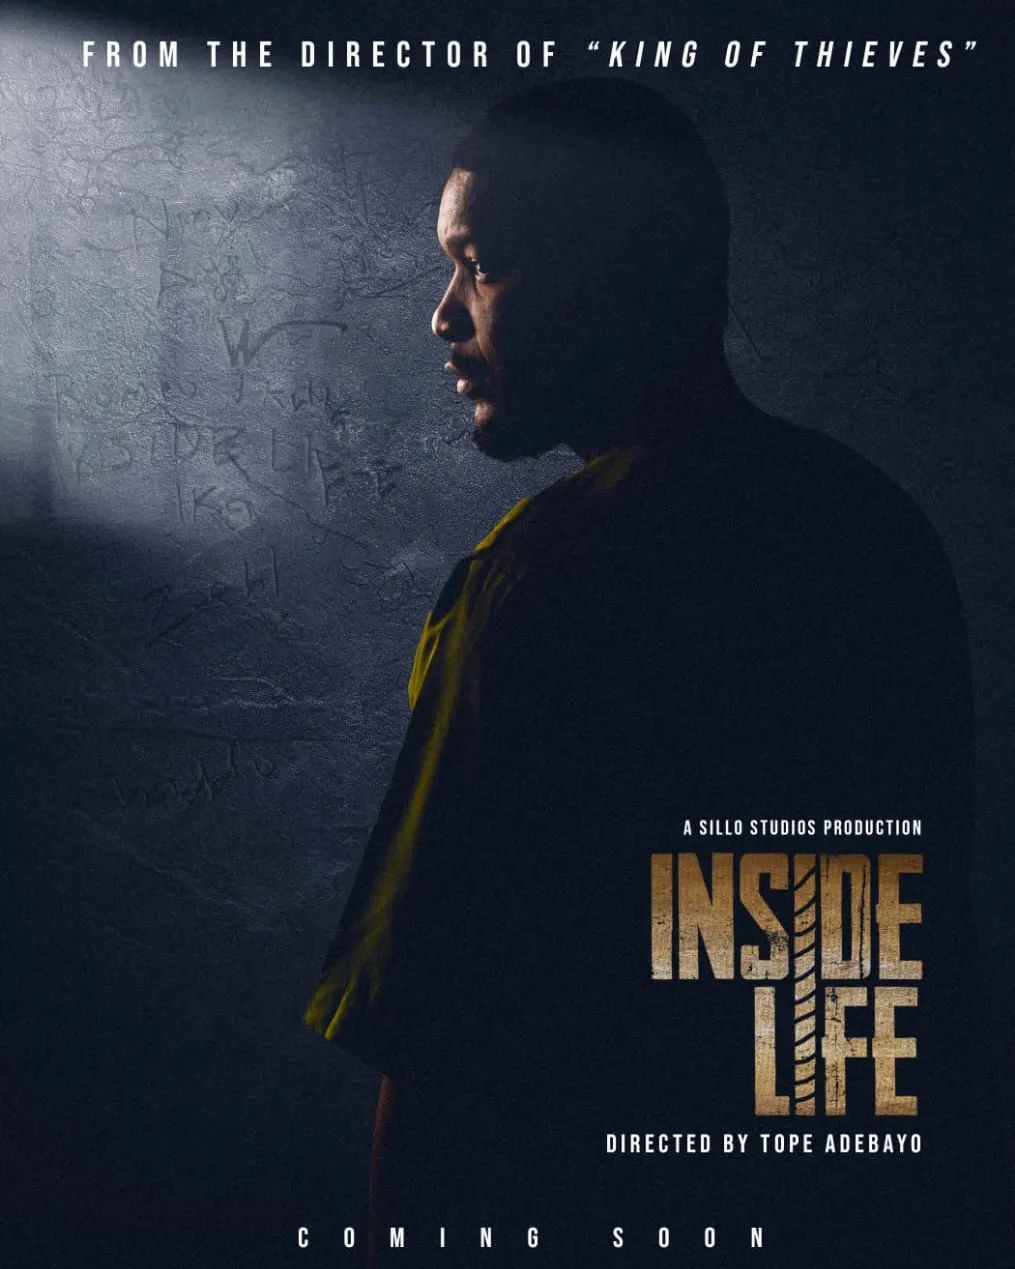 285701892 2869430256691877 3796885871722613470 n - Chuks Enete “Inside Life” To Begin Theatrical Run From September 9th